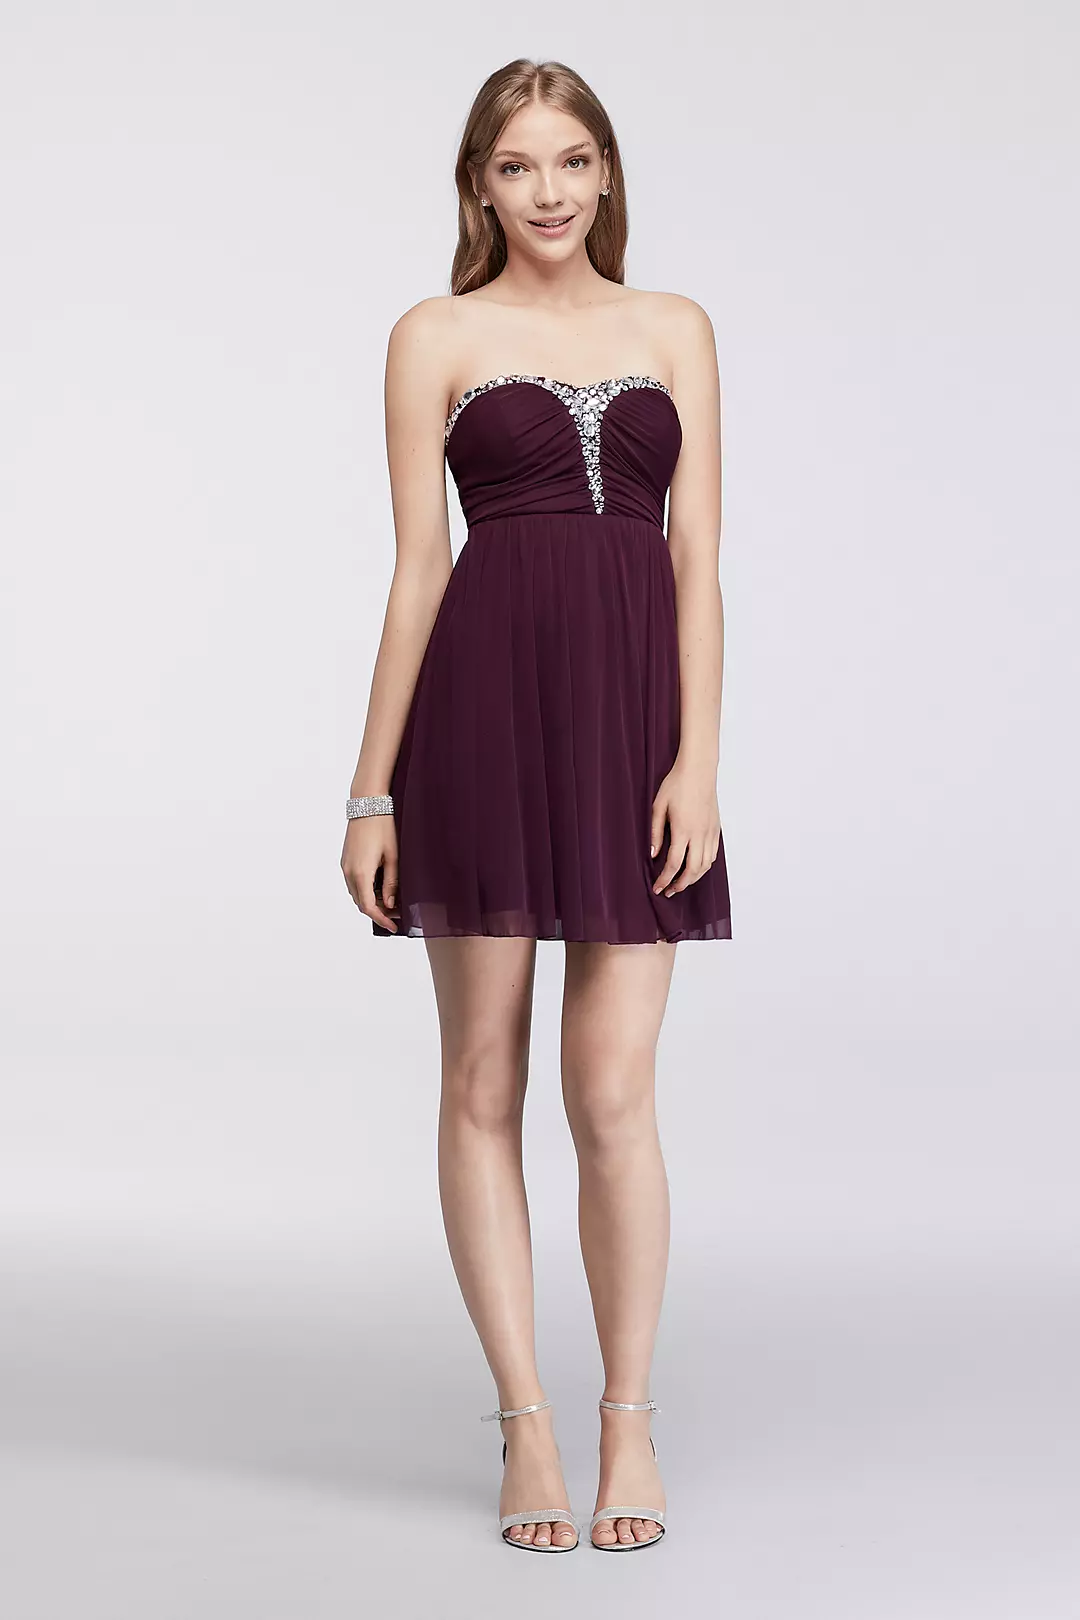 Strapless Dress with Sweetheart Crystal Bodice Image